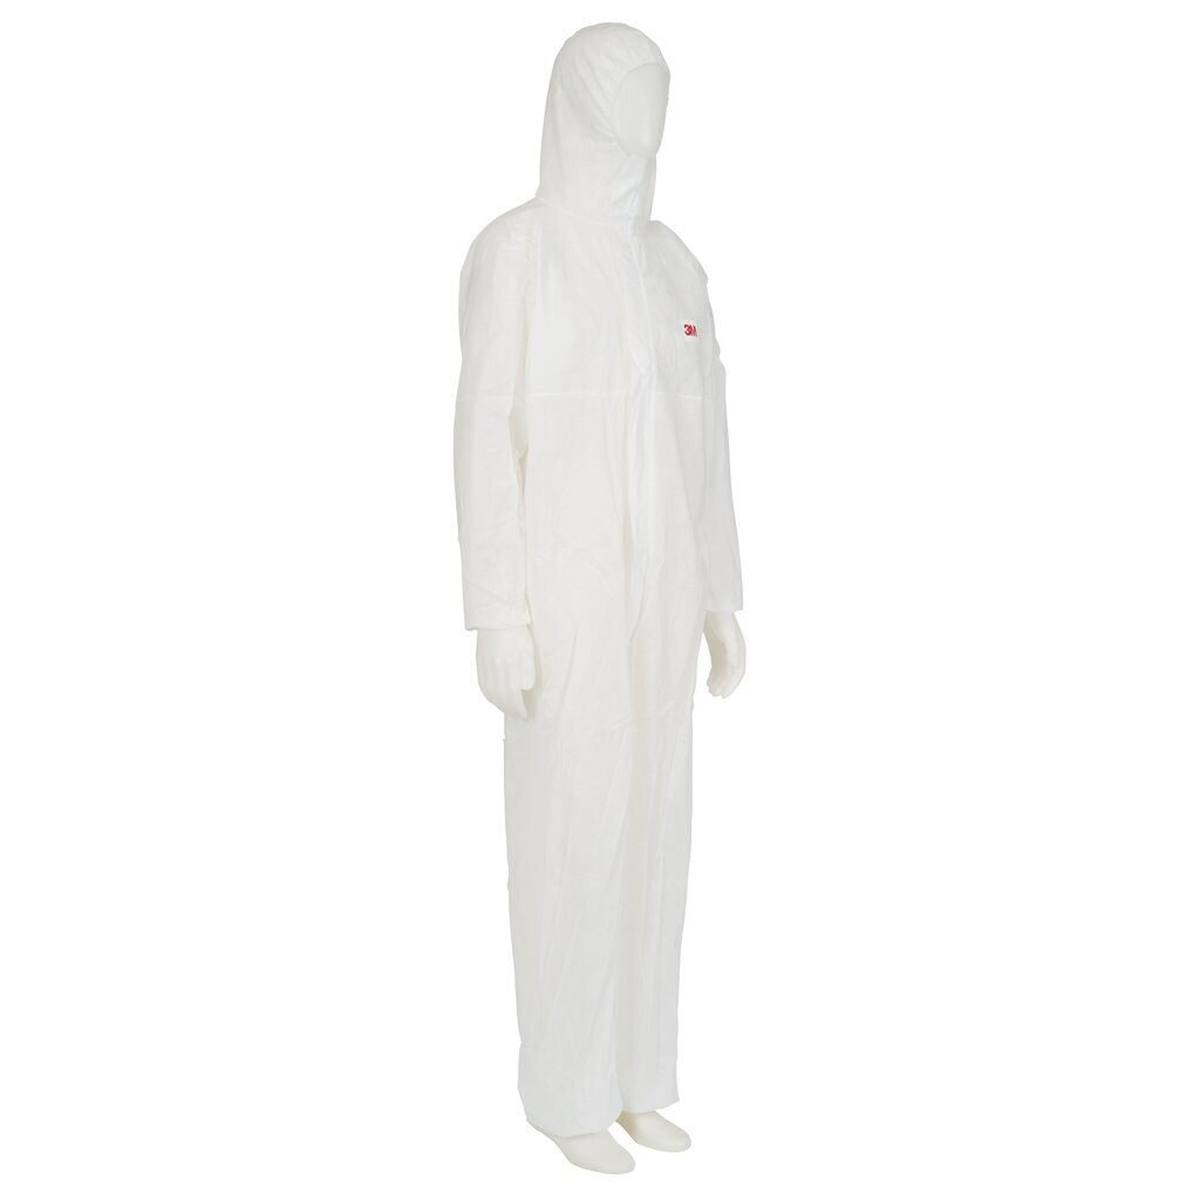 3M 4500 W Protective suit, white, CE, size 3XL, material polypropylene, elasticated cuffs